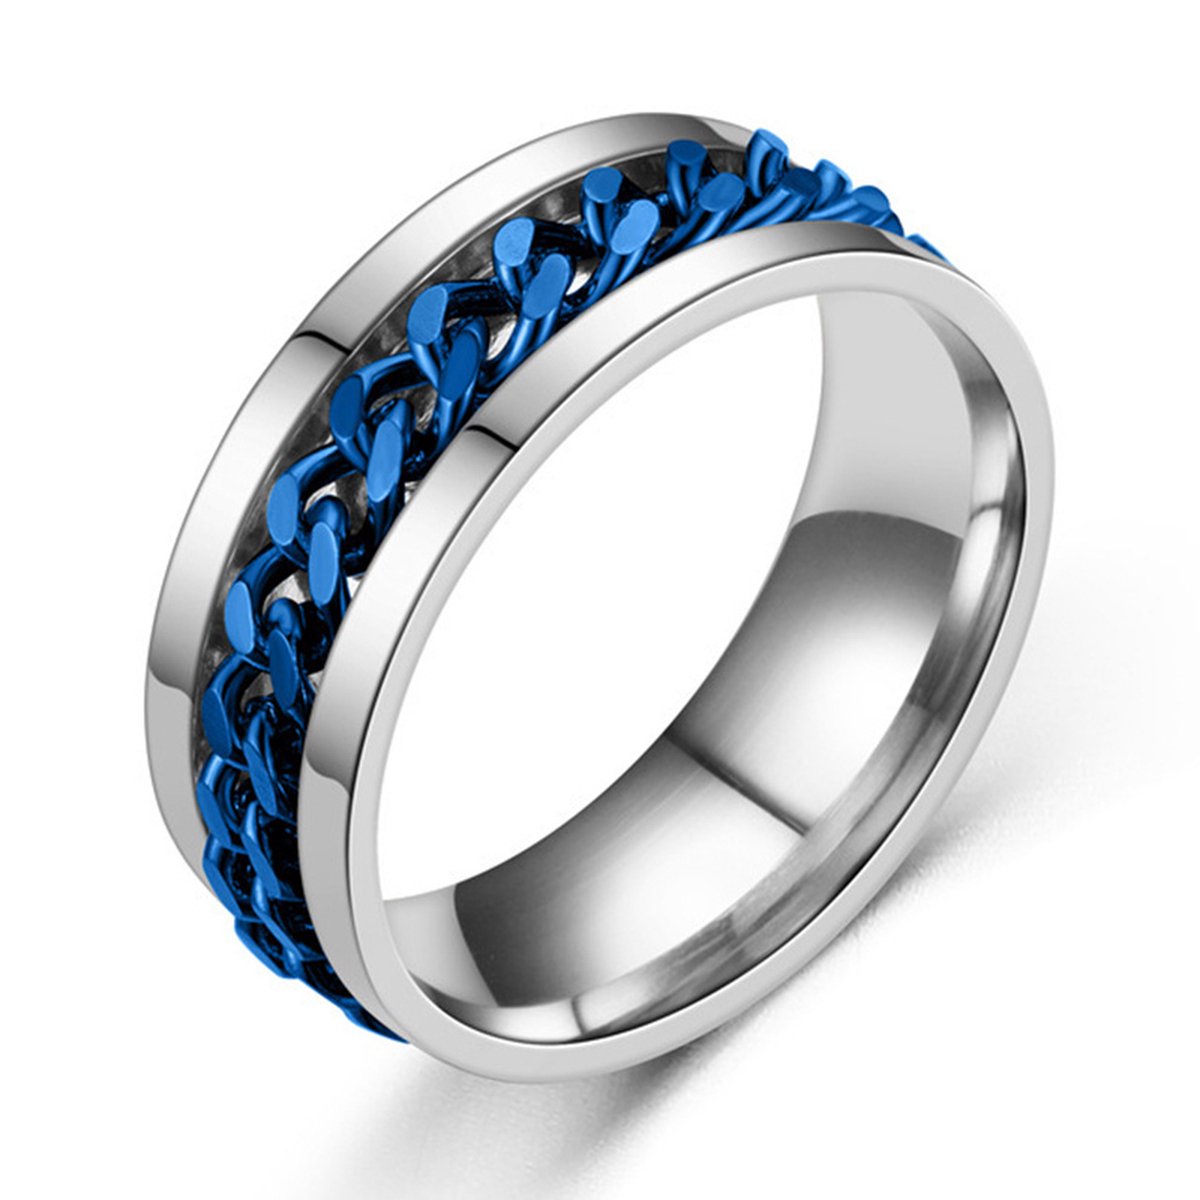 Fidget Ring Zilver - Blauw (Maat 70 - 22 mm - 22.3 mm) - Anxiety Ring - Angst Ring - Stress Ring Heren / Dames - Spinning Ring - Draai Ring - Zilver Roestvrij Staal - Spinner Ring